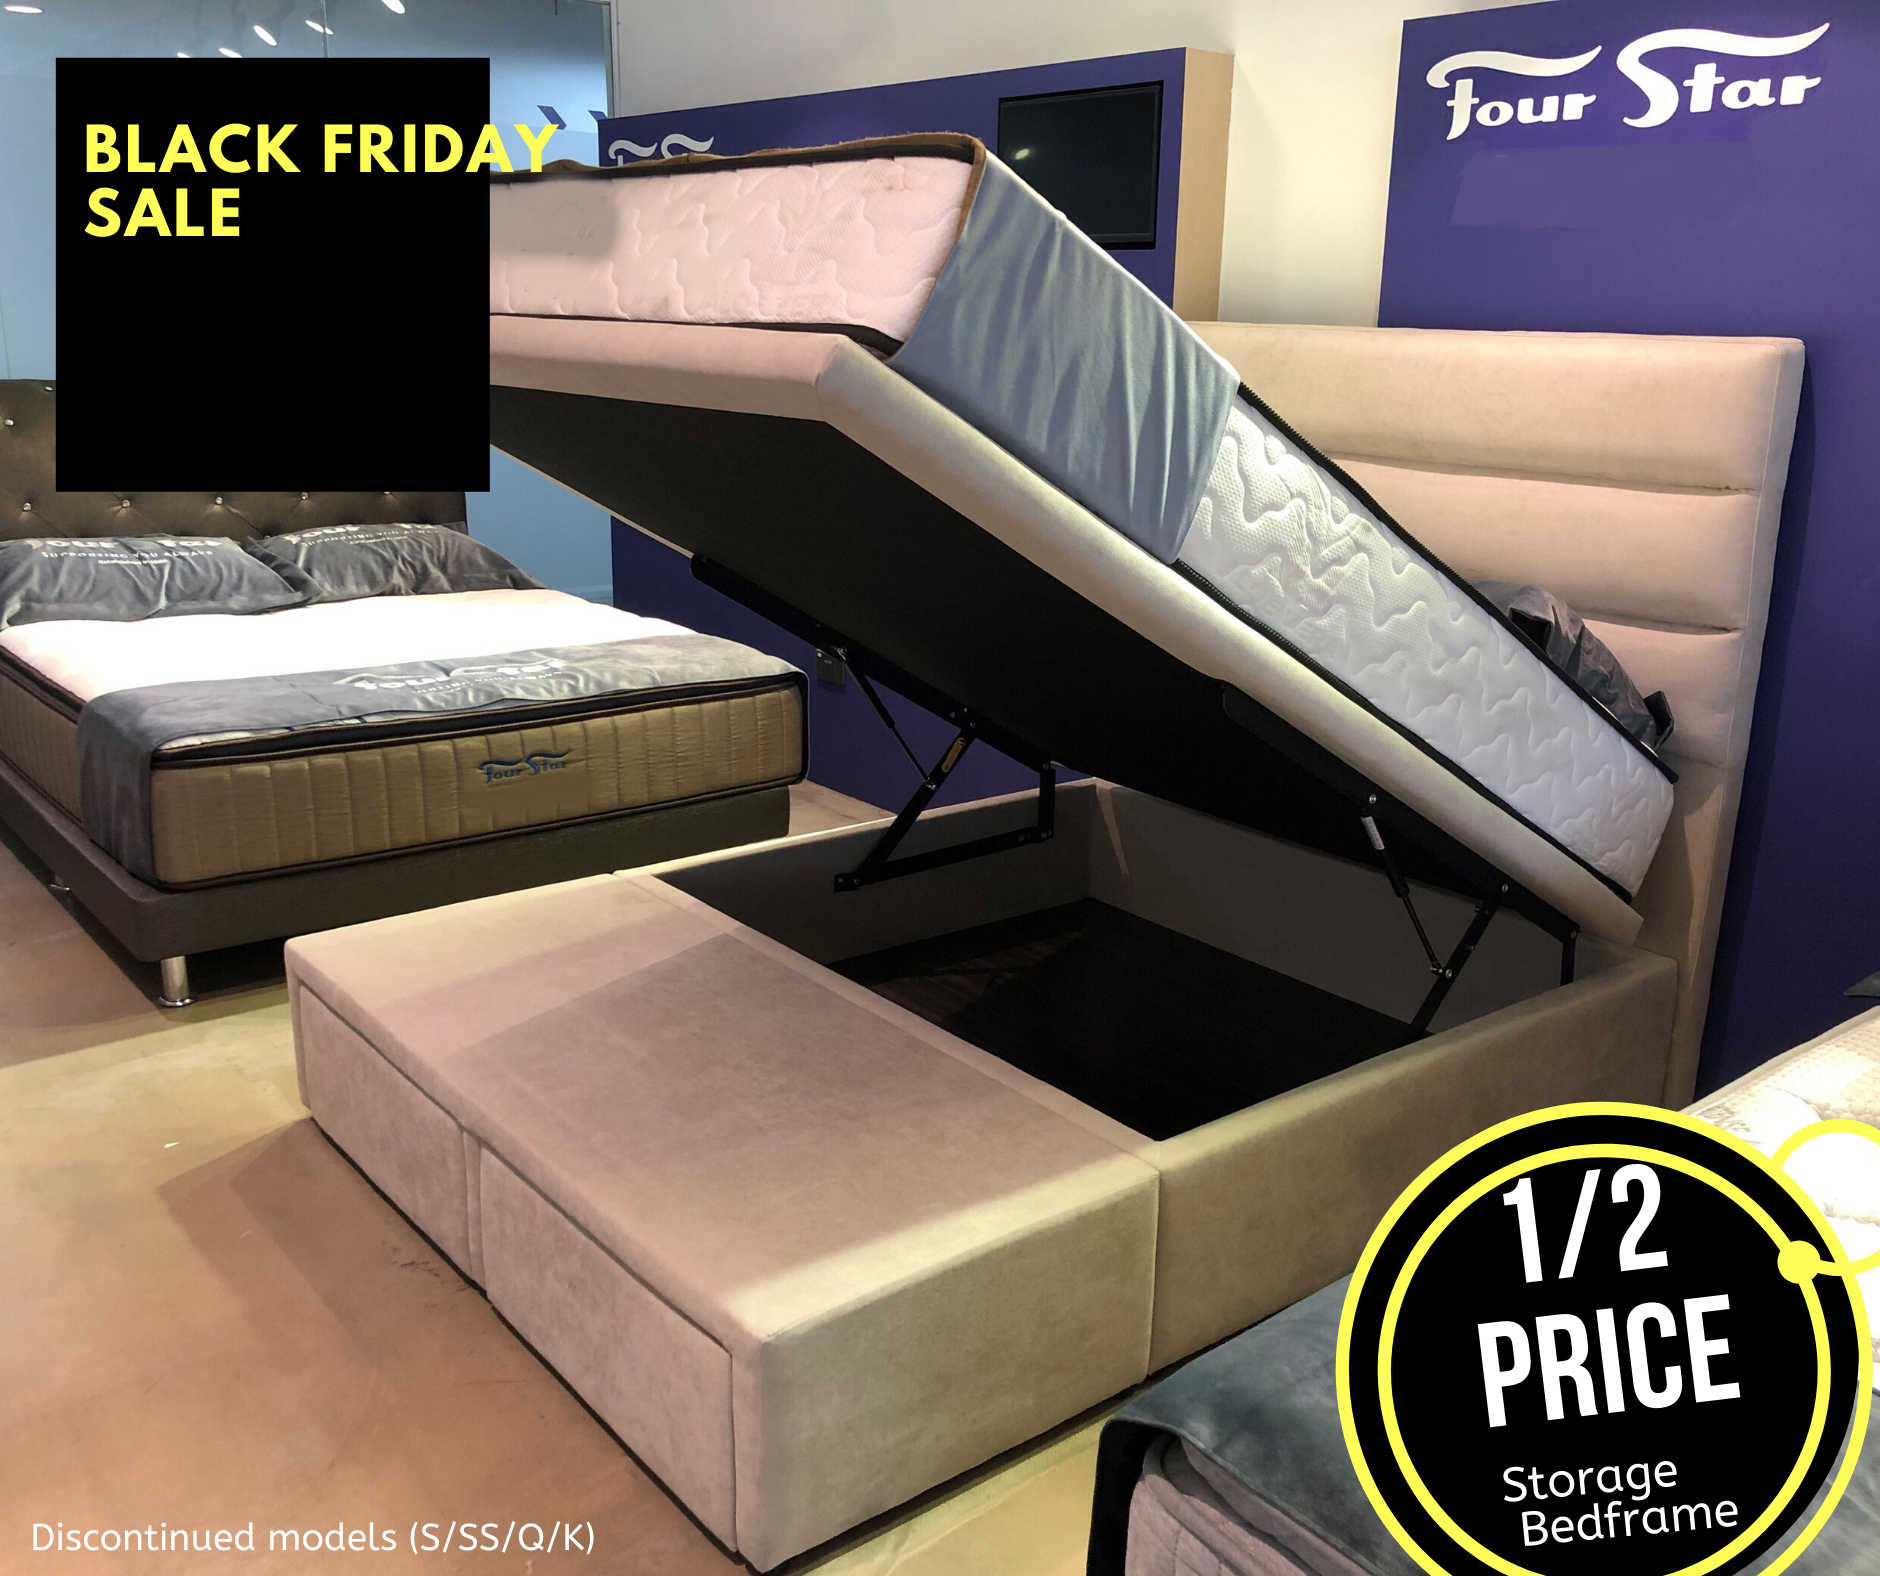 2 DAYS ONLY! 16 – 17 NOV Four Star Mattress Gallery is having Pre BLACK FRIDAY SALE with its largest discount this year! - 2